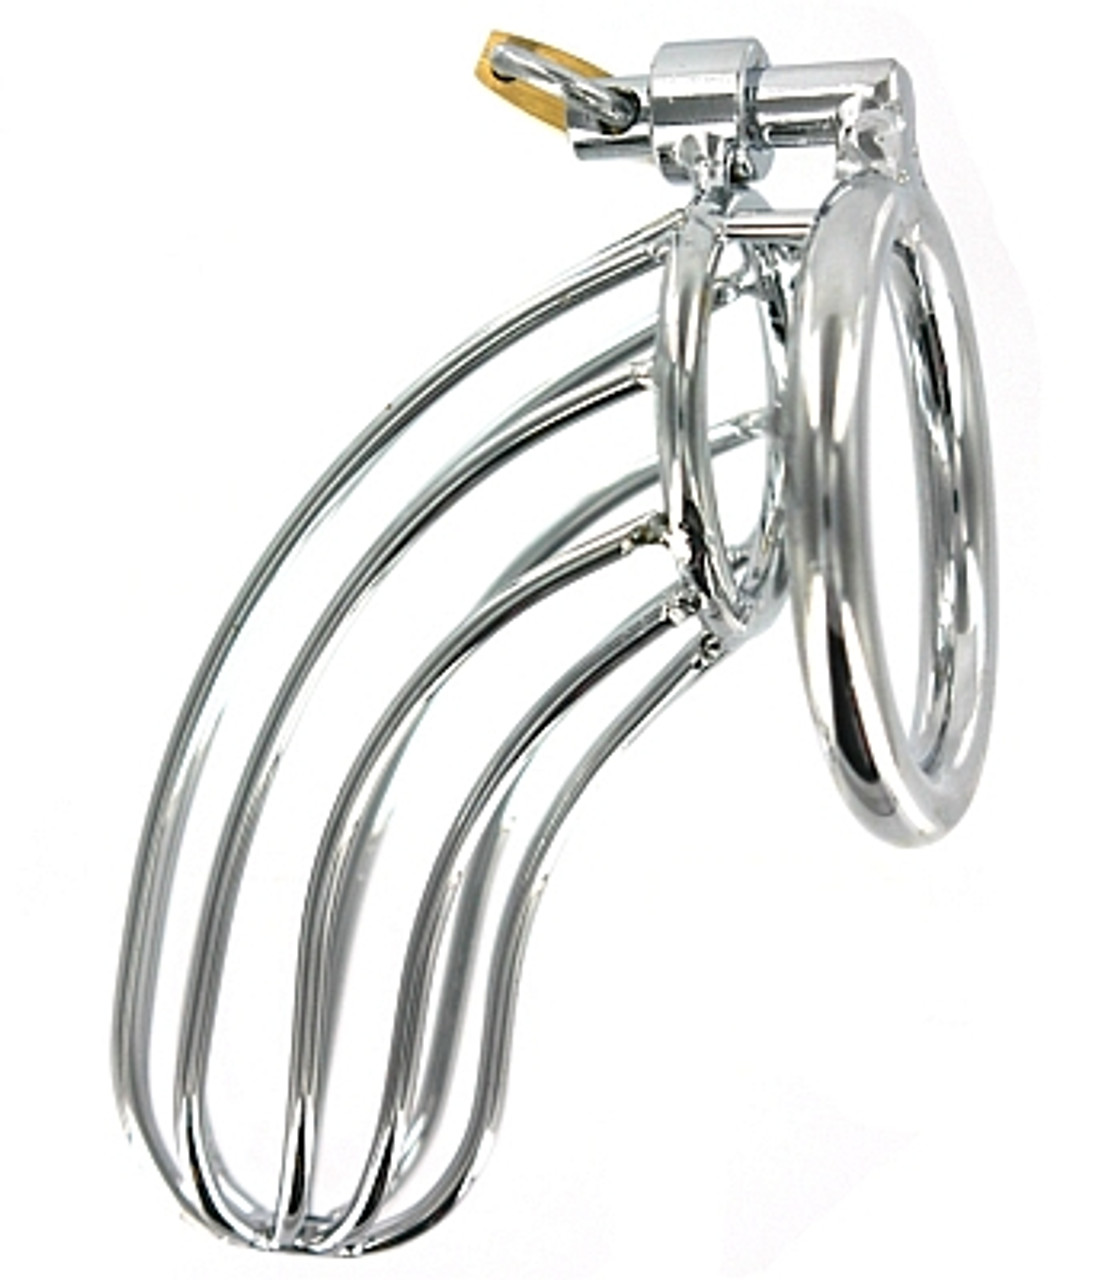 Steel Metal Male Cock Cage Male Chastity Device Locked Cage Sex Toy for Men  (3 Rings) (Silver)